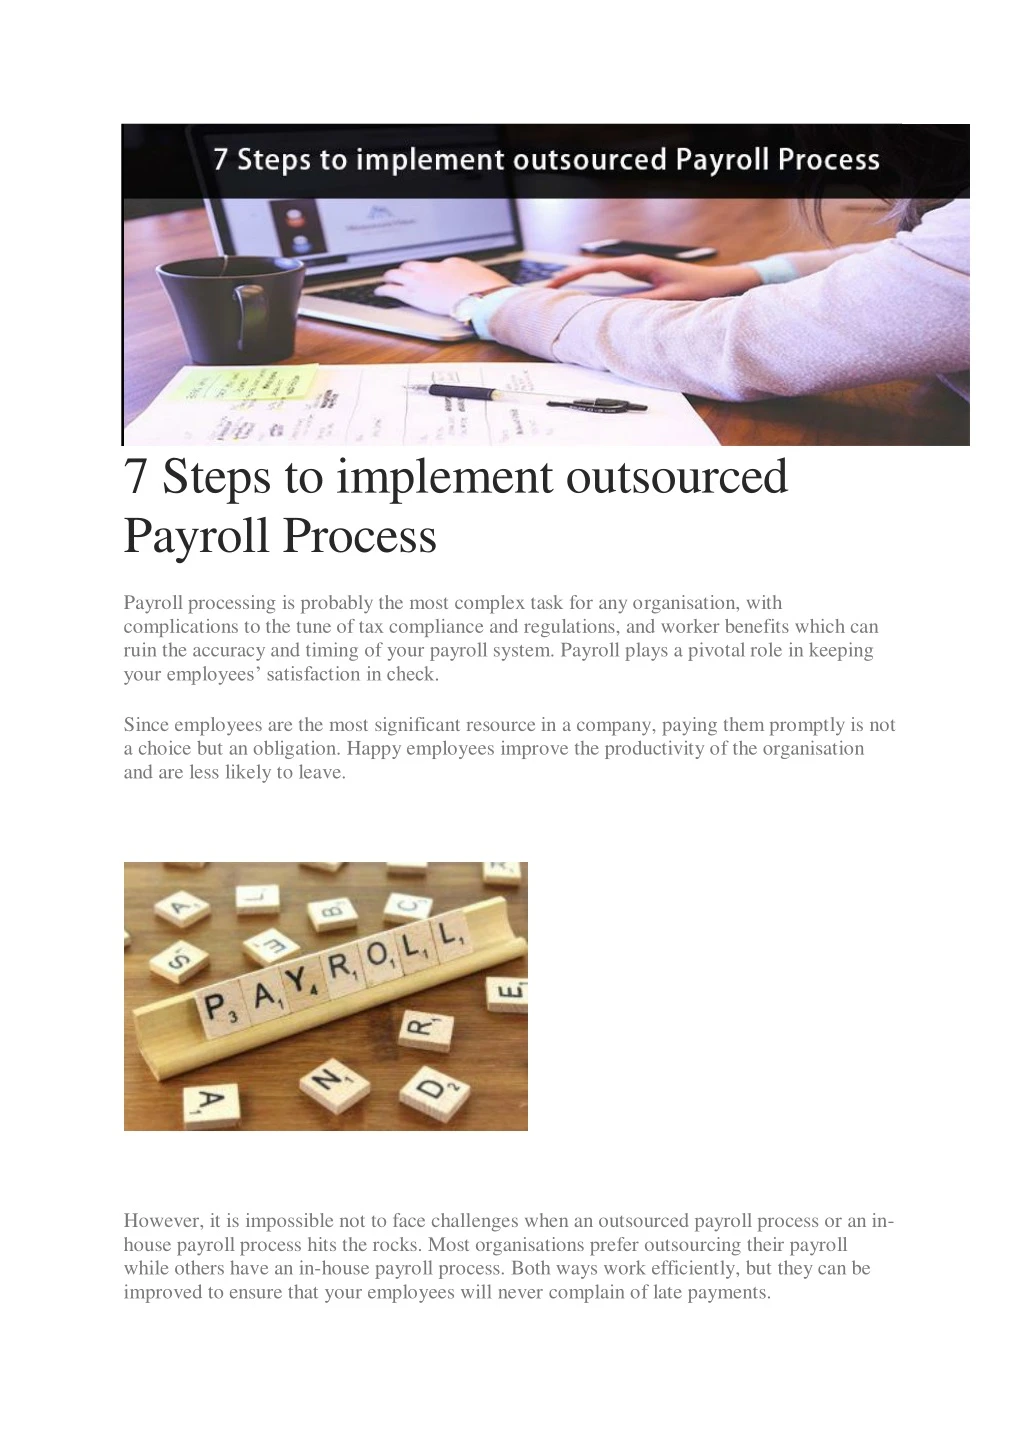 7 steps to implement outsourced payroll process